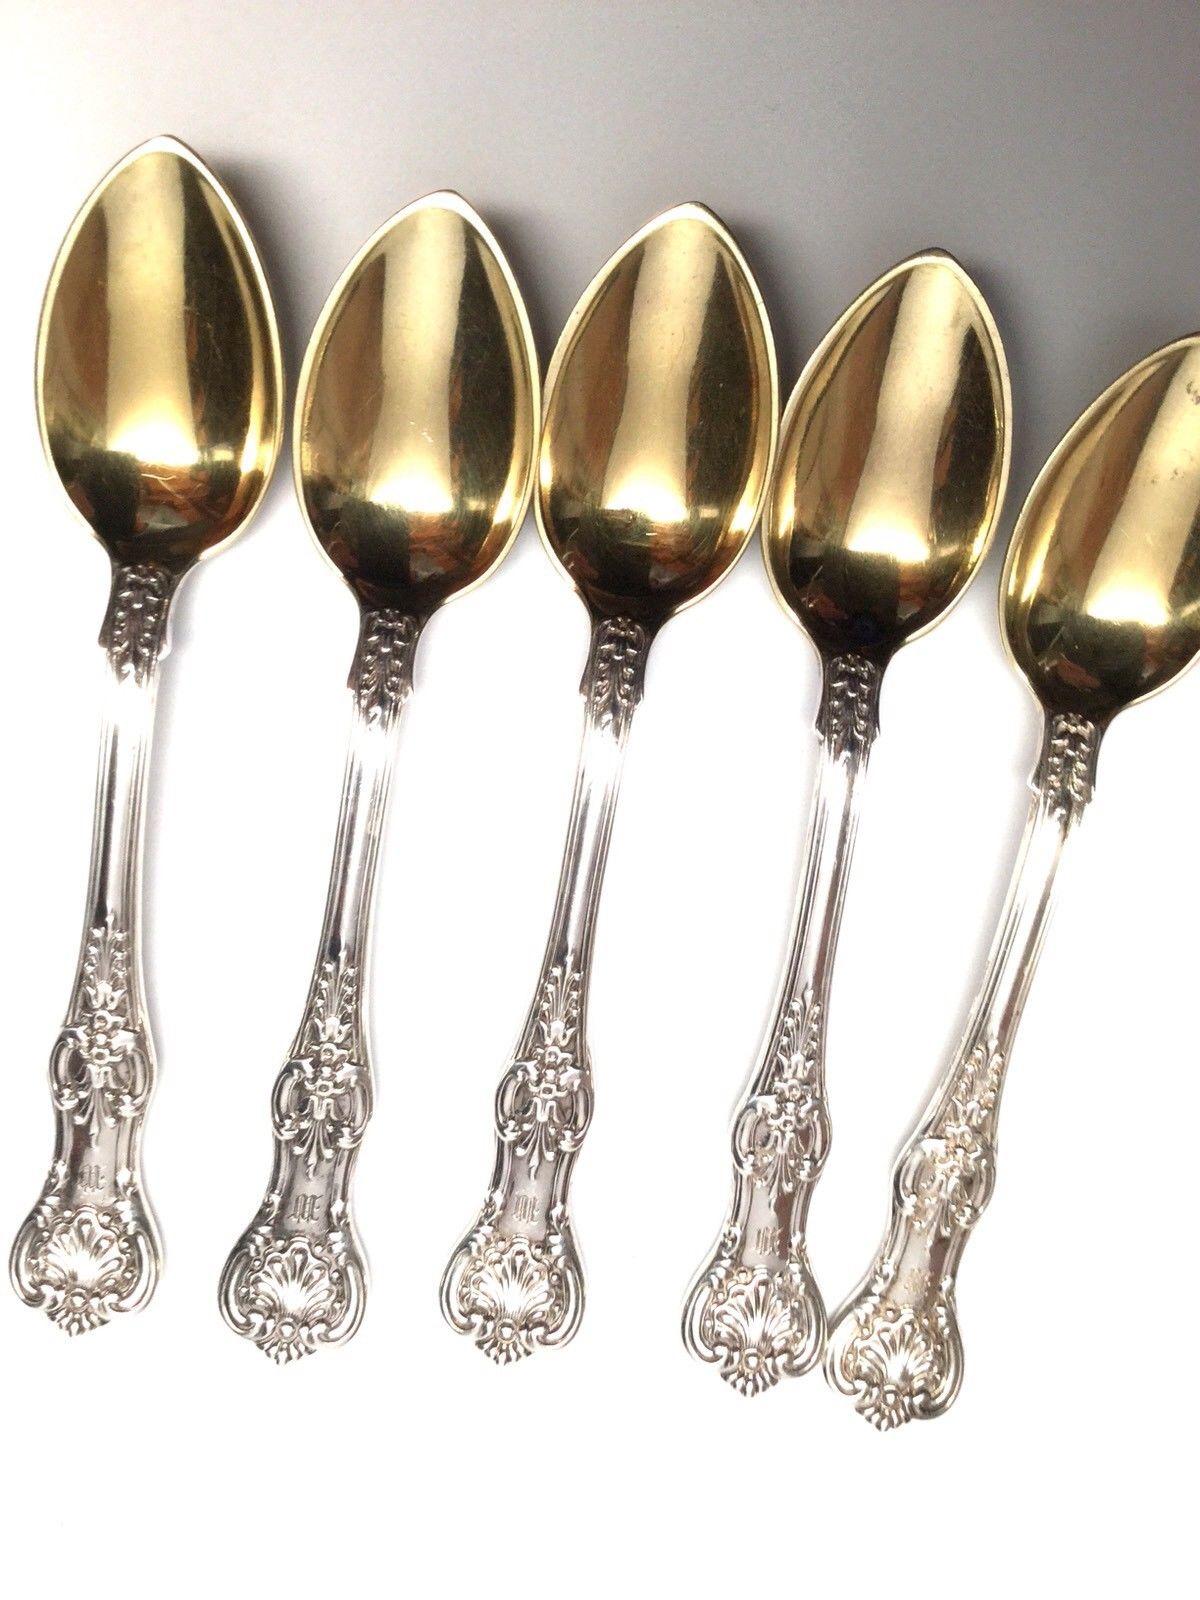 Tiffany & Co. English King Pattern 1885 sterling silver set of 5 demitasse spoons. Presented is a set of 5 sterling silver and gold washed demitasse spoons made by Tiffany & Company. This set is in the English King pattern, which was patented in